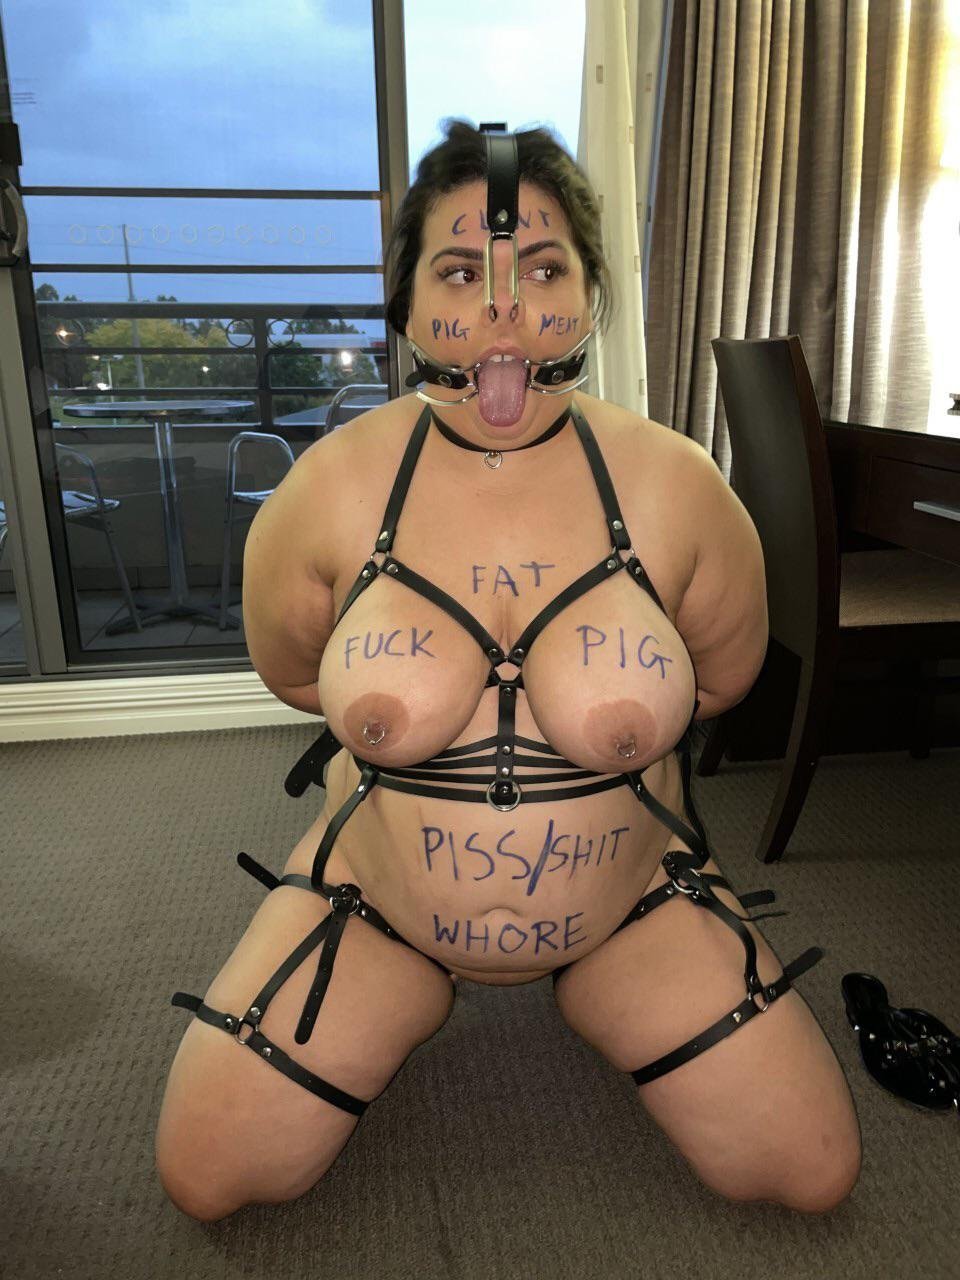 Perfect humiliation Pig - Porn Videos and Photos picture